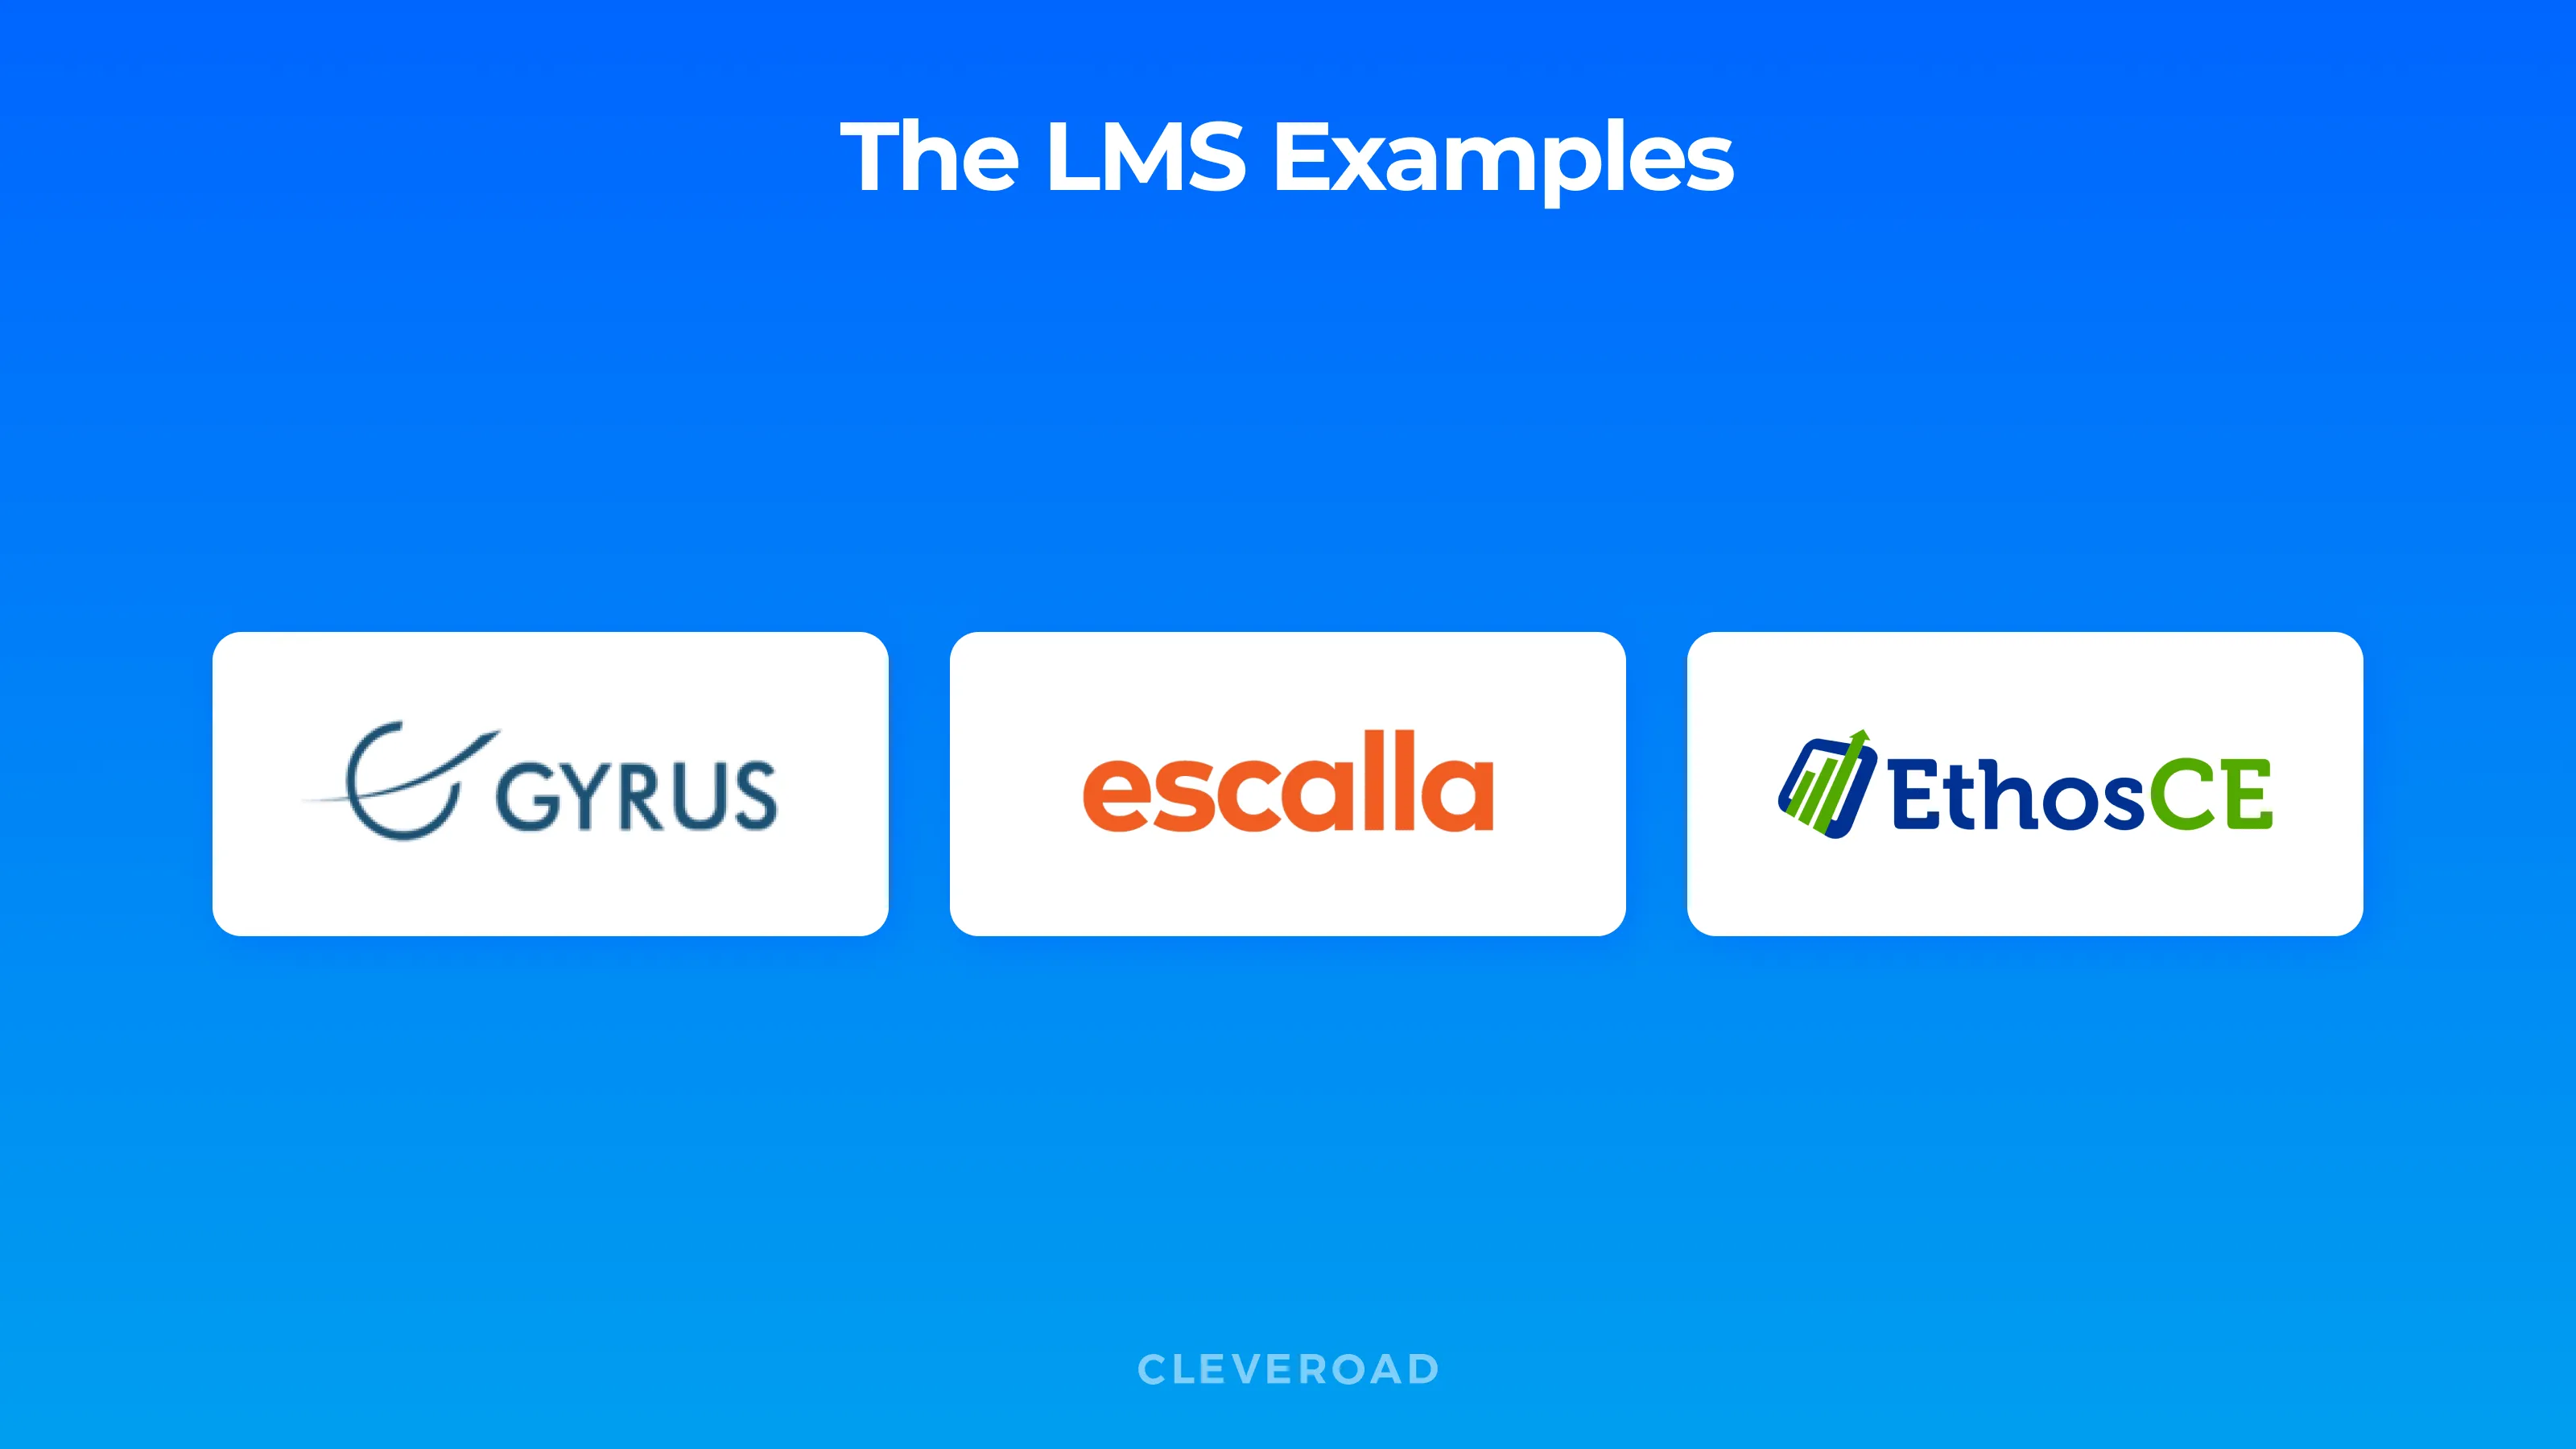 The healthcare LMS examples